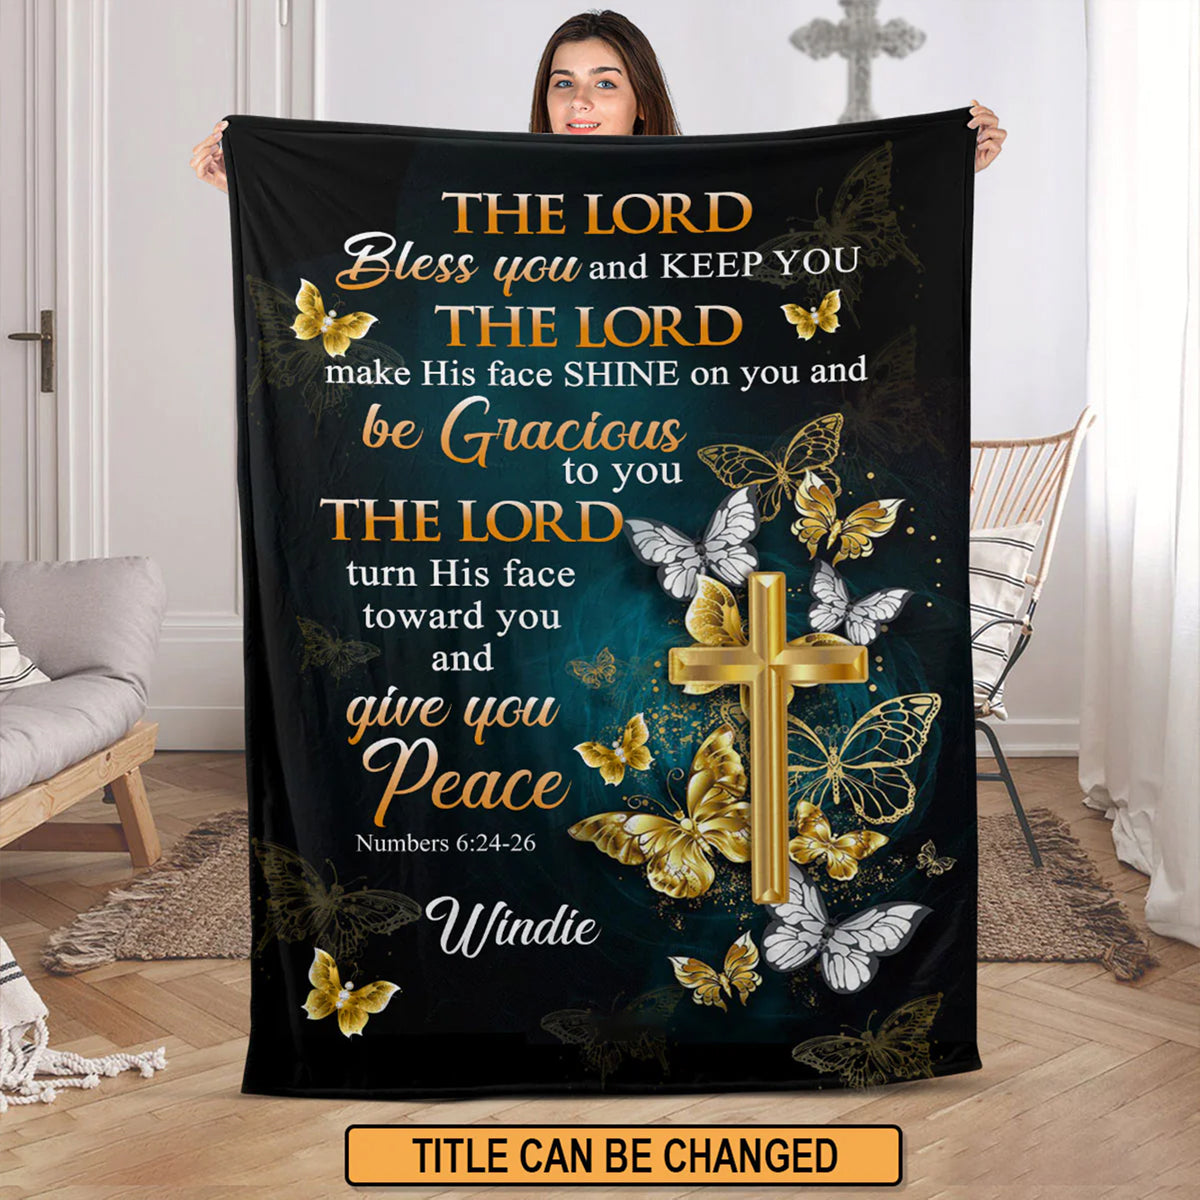 Christianart Blanket, The Lord Turn His Face Toward You And Give You Peace, Christian Blanket, Bible Verse Blanket, Christmas Gift, CABBK04111223. - Christian Art Bag